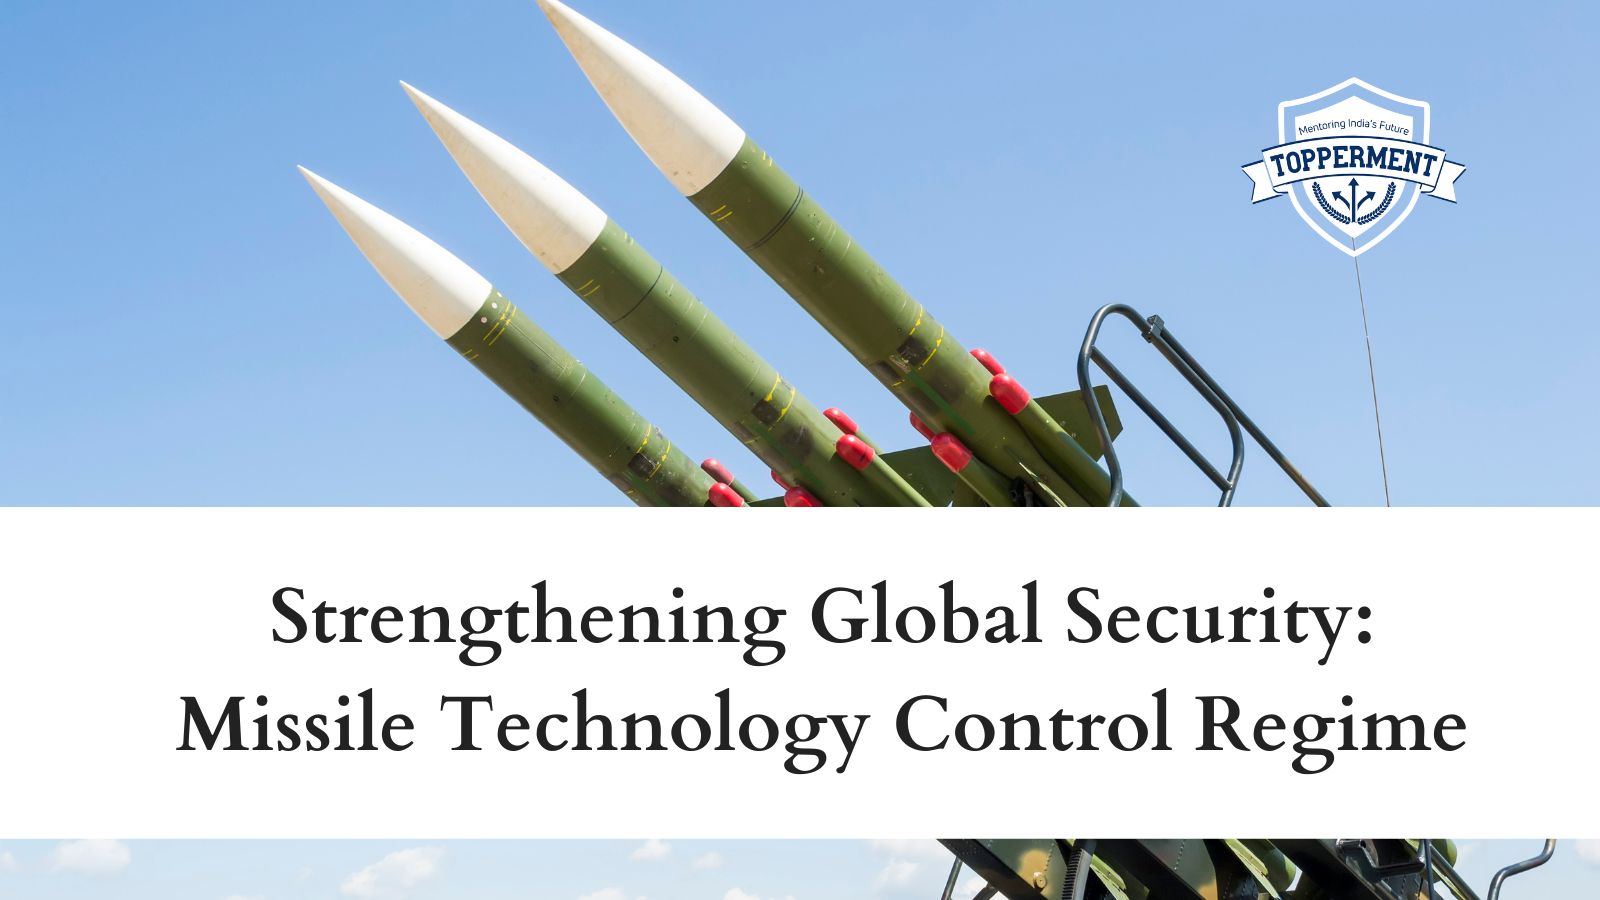 Strengthening-Global-Security-Missile-Technology-Control-Regime-Best-UPSC-IAS-Coaching-For-Mentorship-And-Guidance